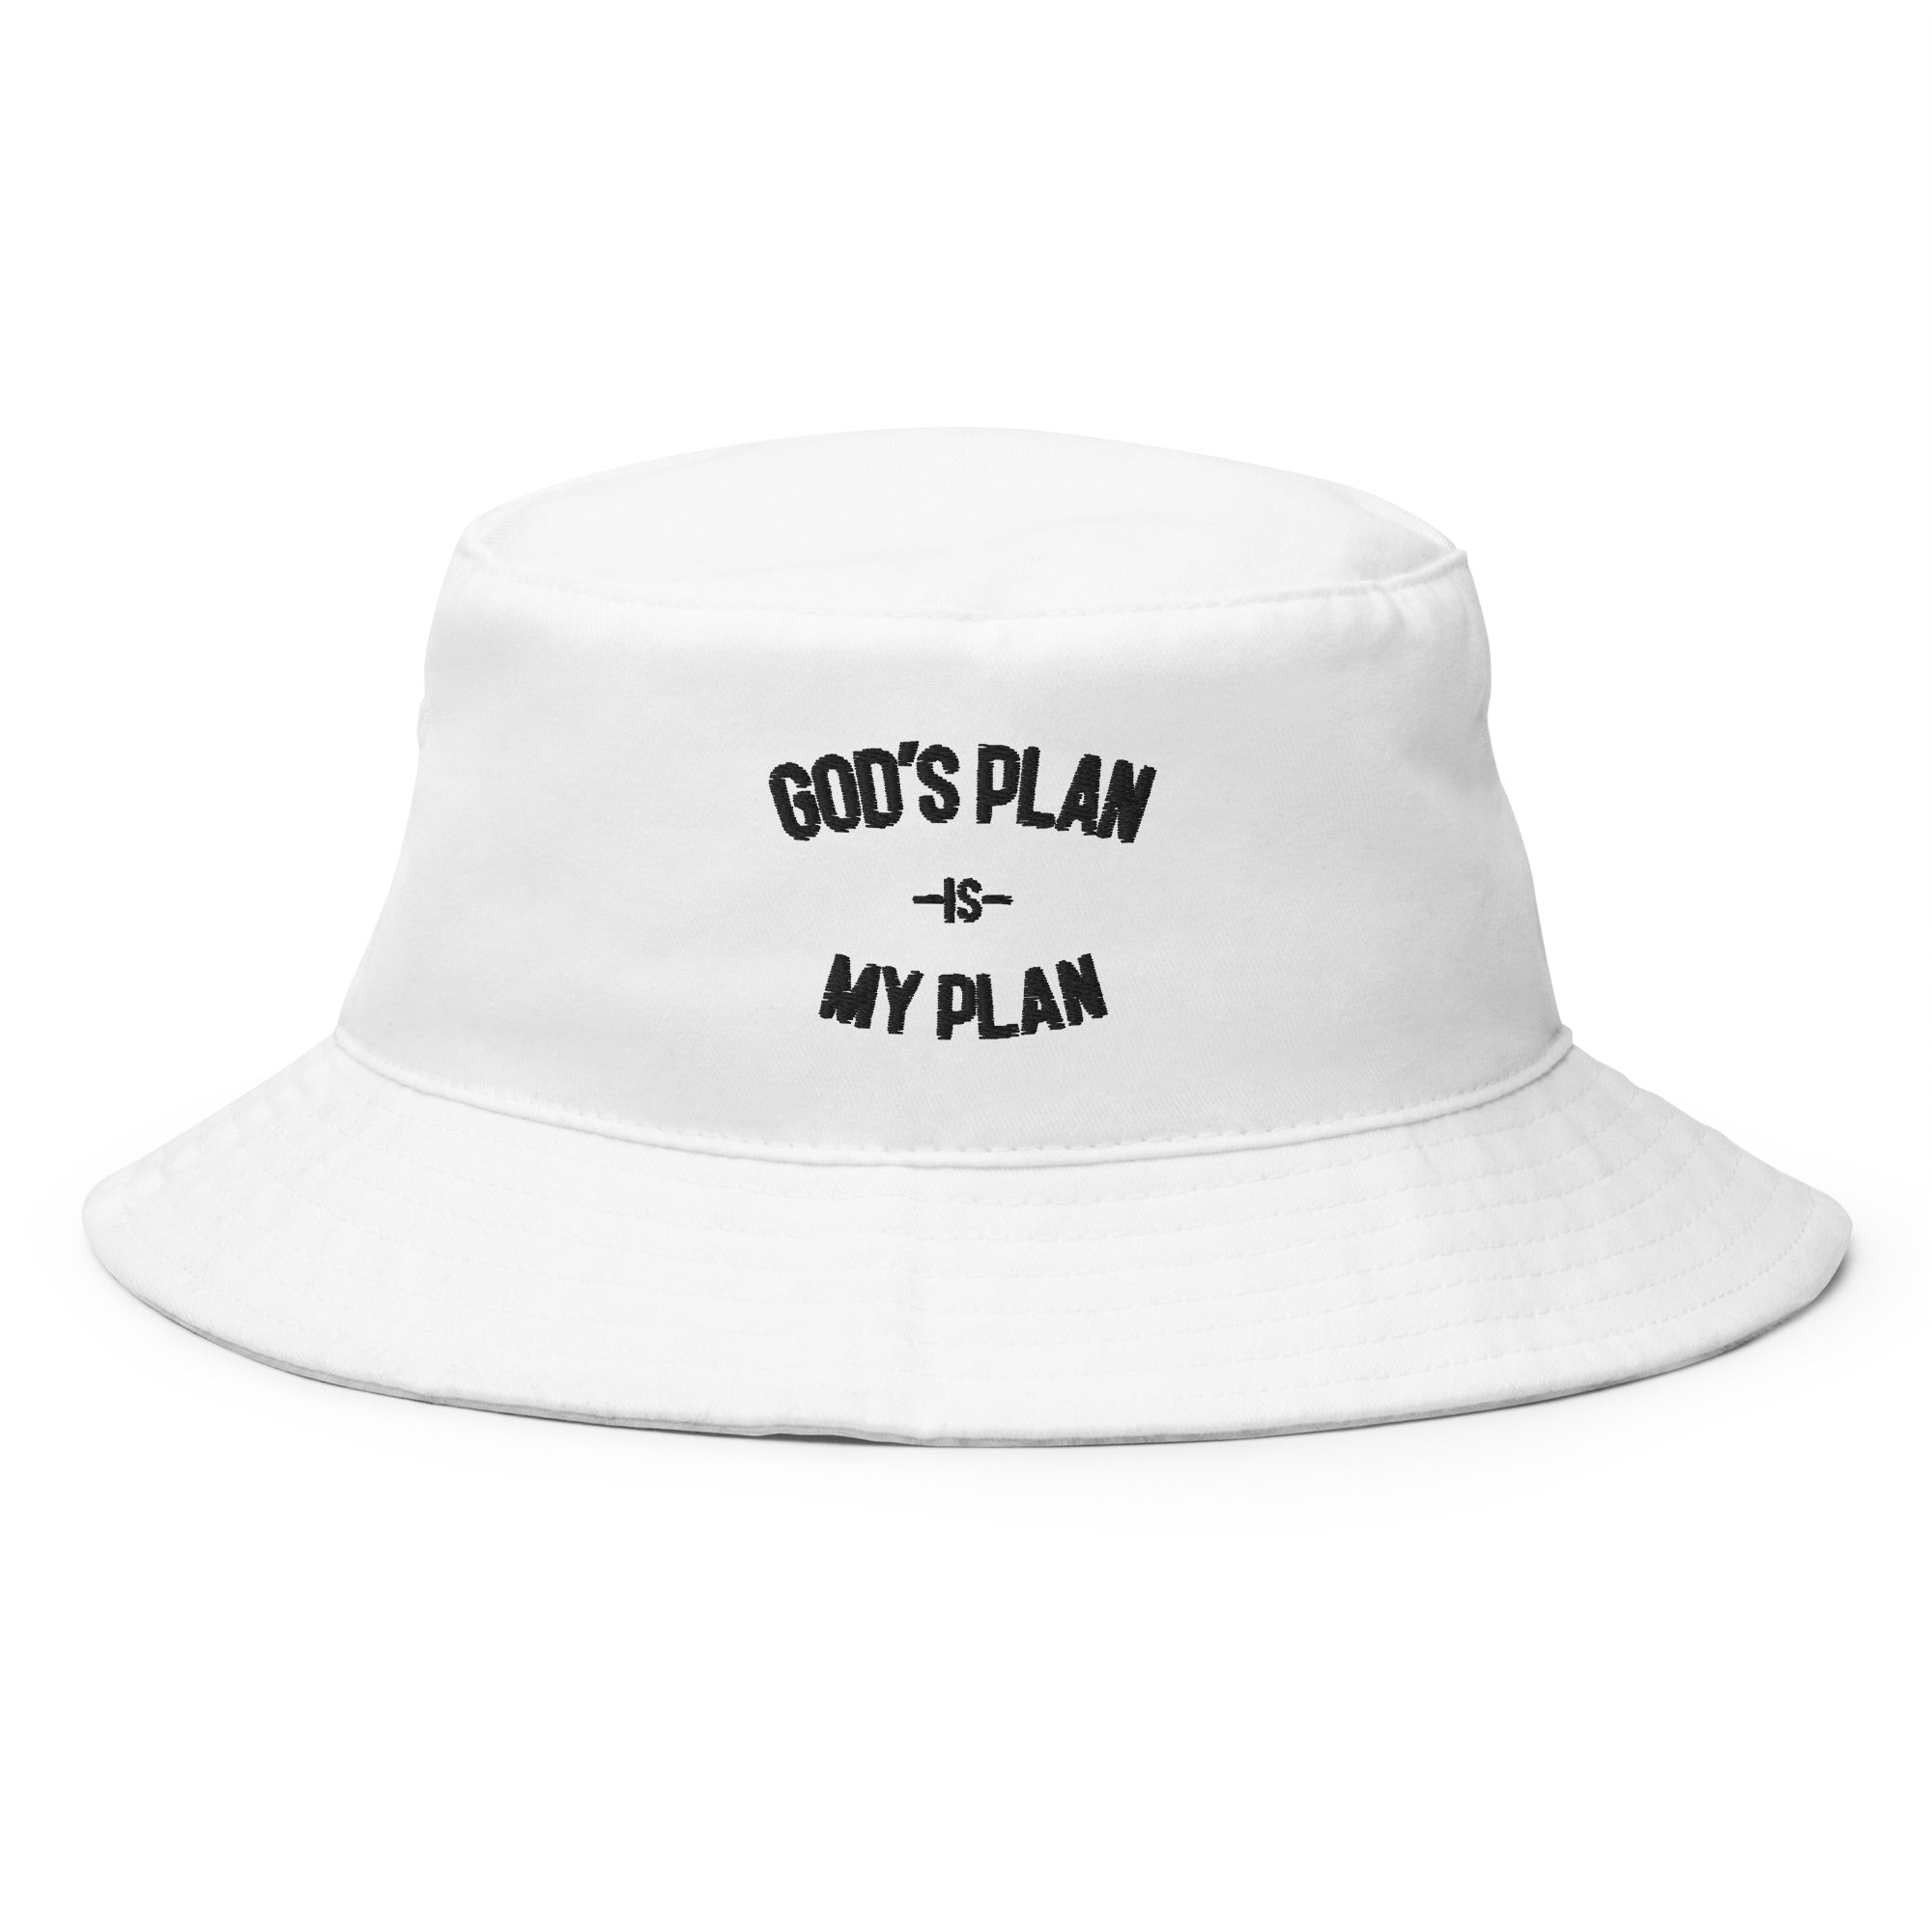 God's Plan My Plan Bucket Hat, Used By God, Used By God Clothing, Christian Apparel, Christian Hats, Christian T-Shirts, Christian Clothing, God Shirts, Christian Sweatshirts, God Clothing, Jesus Hoodie, Jesus Clothes, God Is Dope, Art Of Homage, Red Letter Clothing, Elevated Faith, Active Faith Sports, Beacon Threads, God The Father Apparel